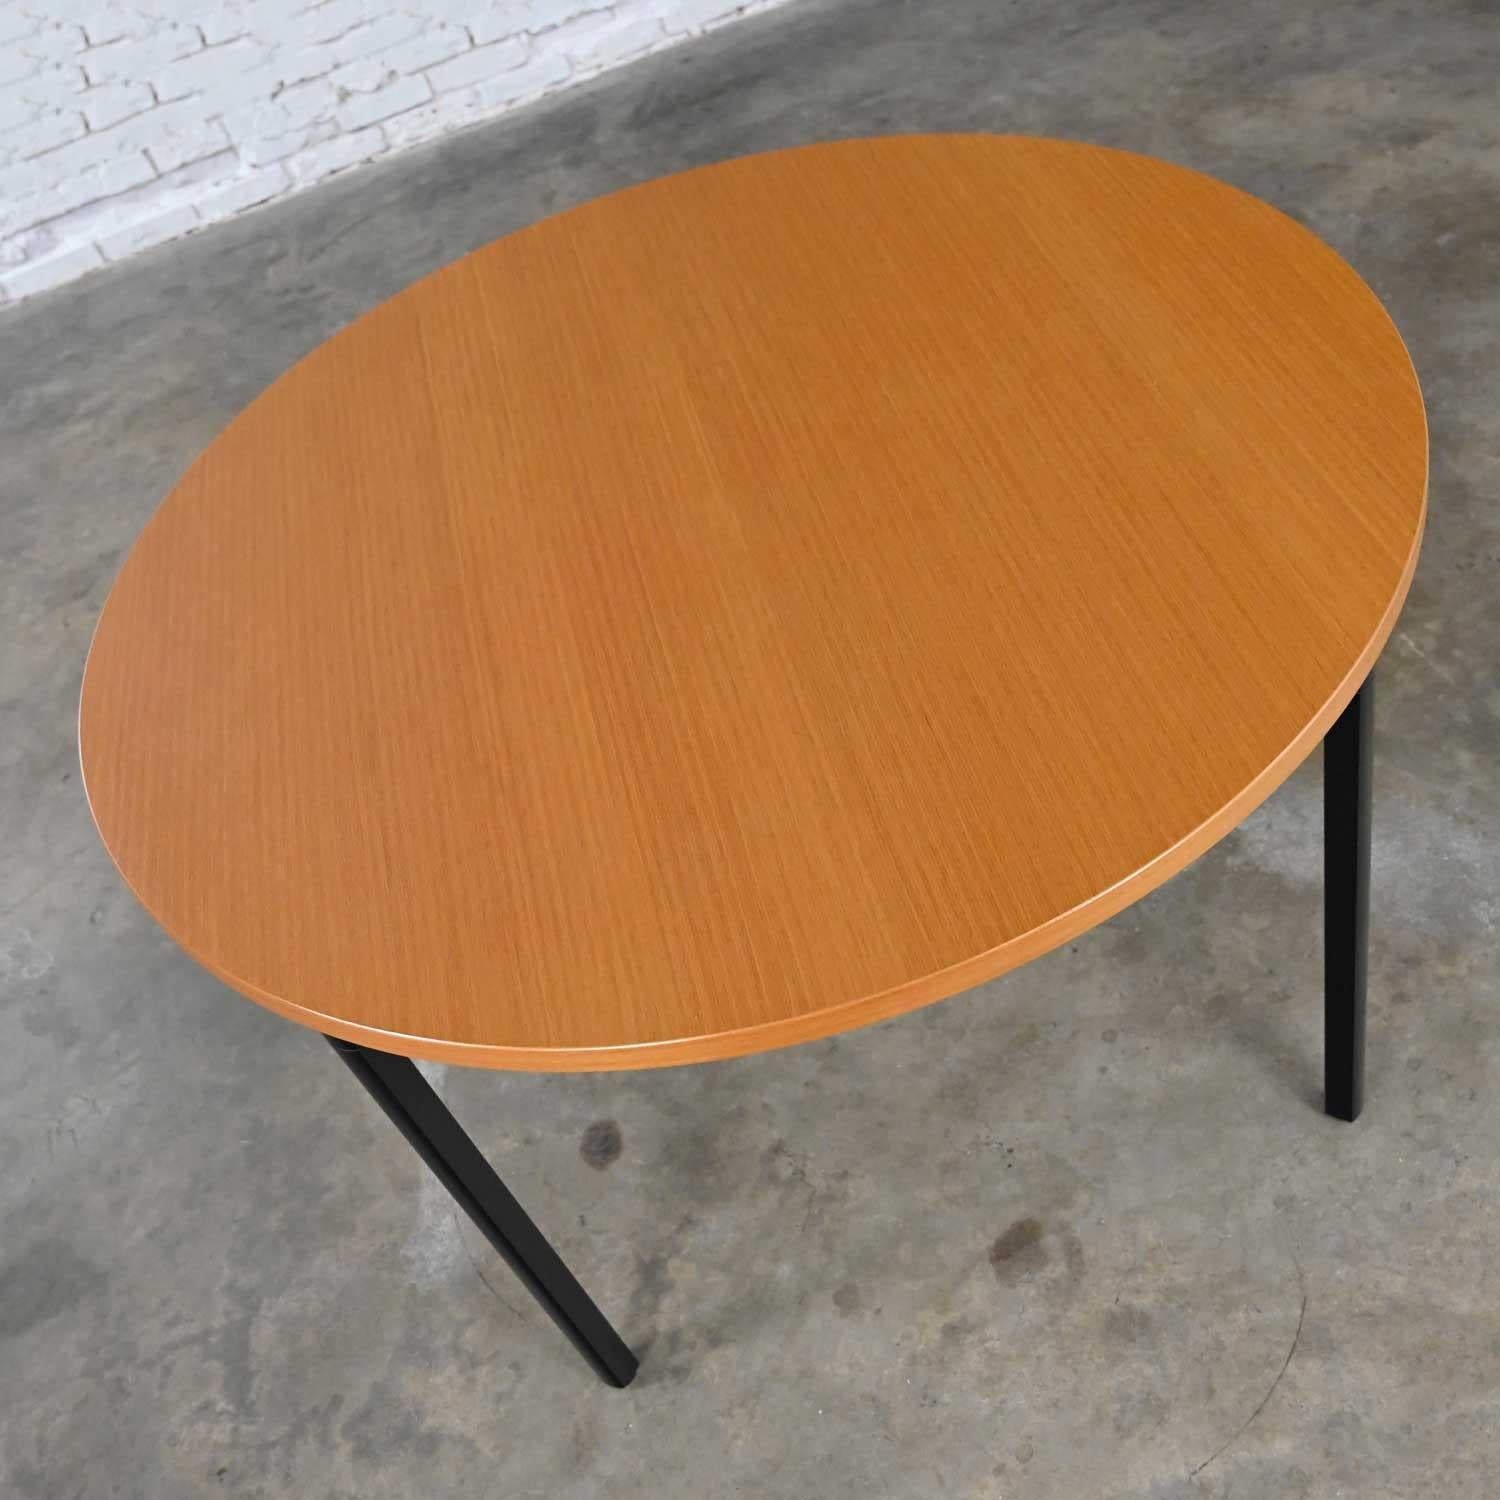 Herman Miller Natural Oak Round Everywhere Table by Dan Grabowski In Good Condition For Sale In Topeka, KS